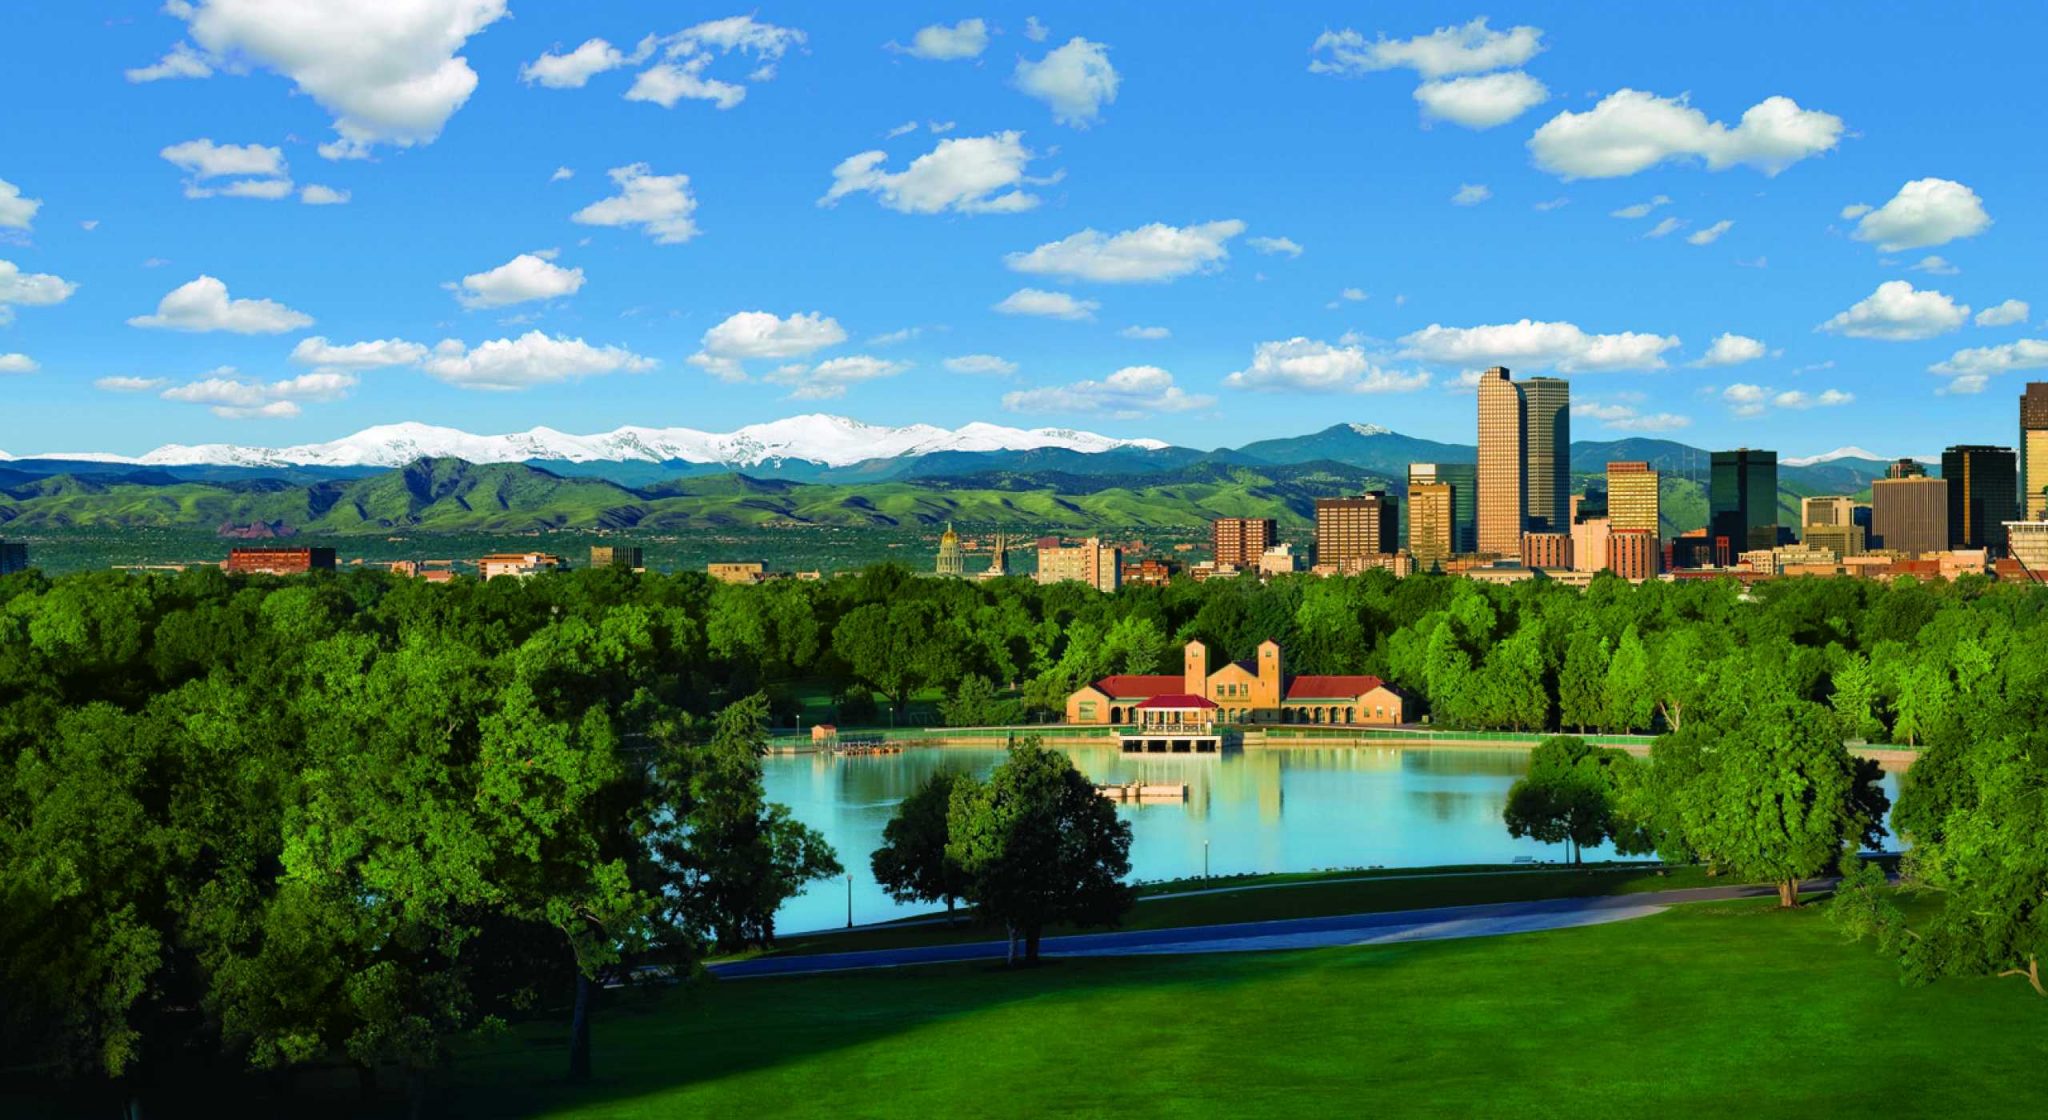 City park lake in the foreground. distance shot of the skyline of Denver with the snowcapped mountains in the background